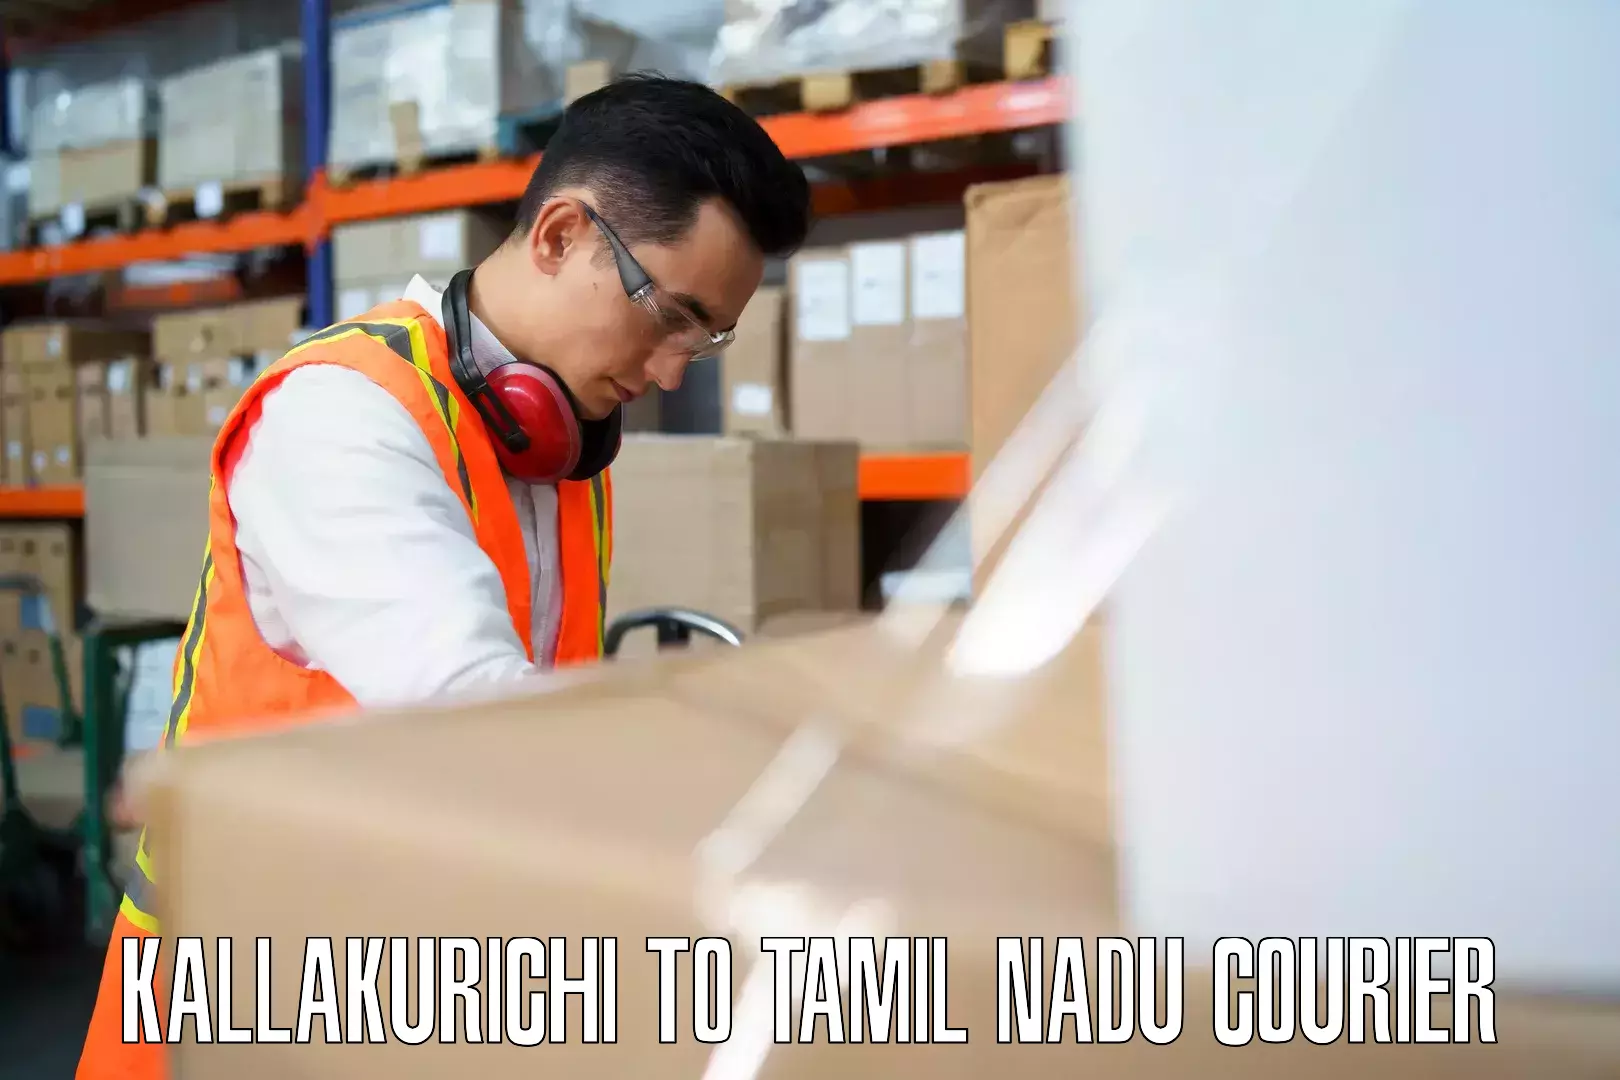 Luggage delivery operations Kallakurichi to Tamil Nadu